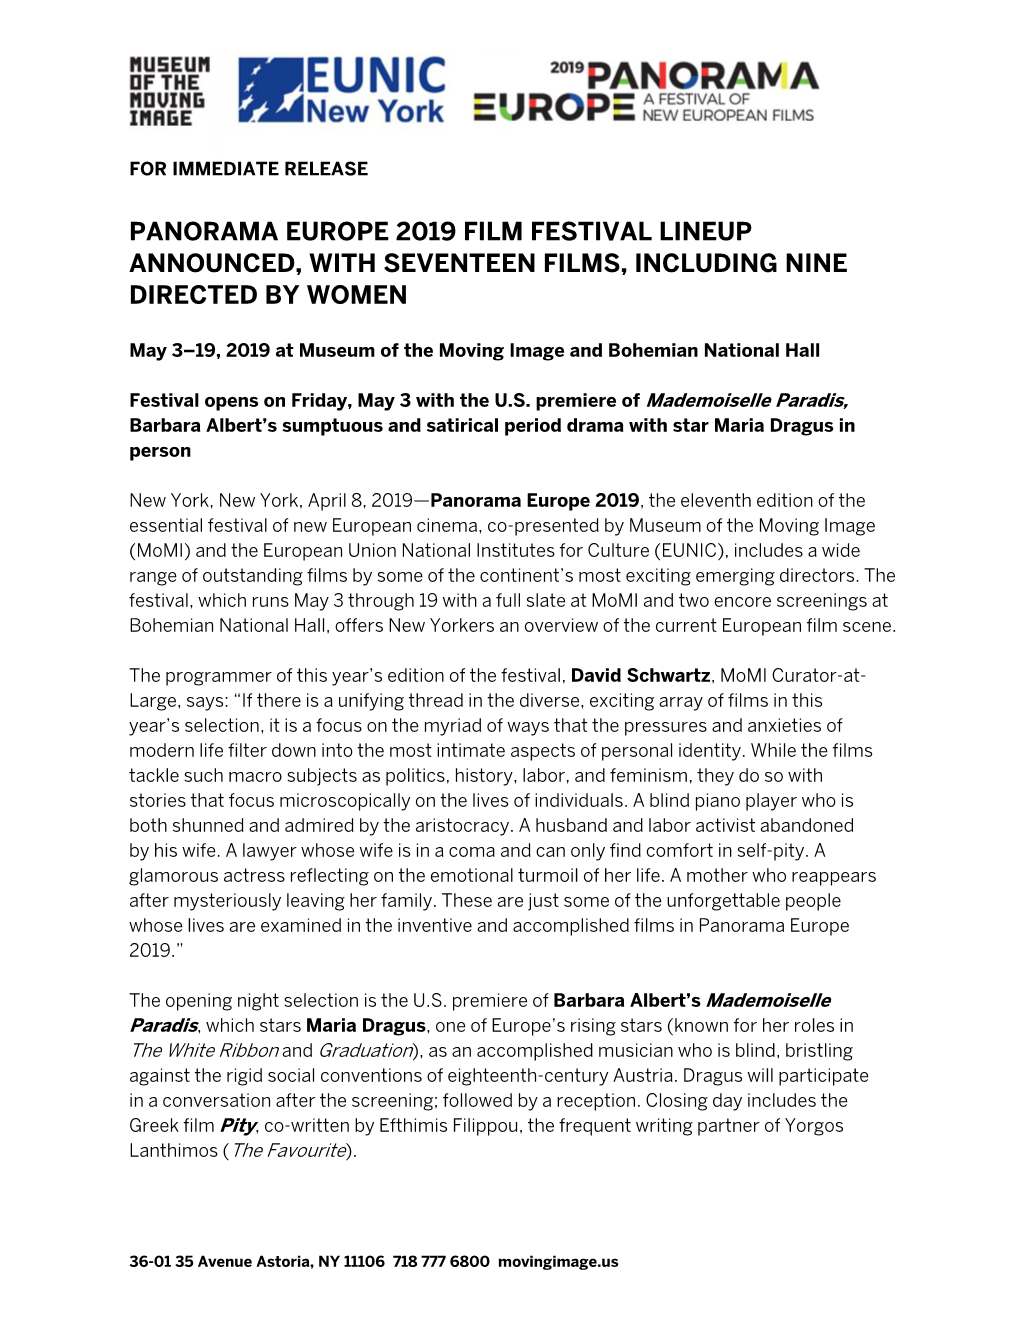 Panorama Europe 2019 Film Festival Lineup Announced, with Seventeen Films, Including Nine Directed by Women